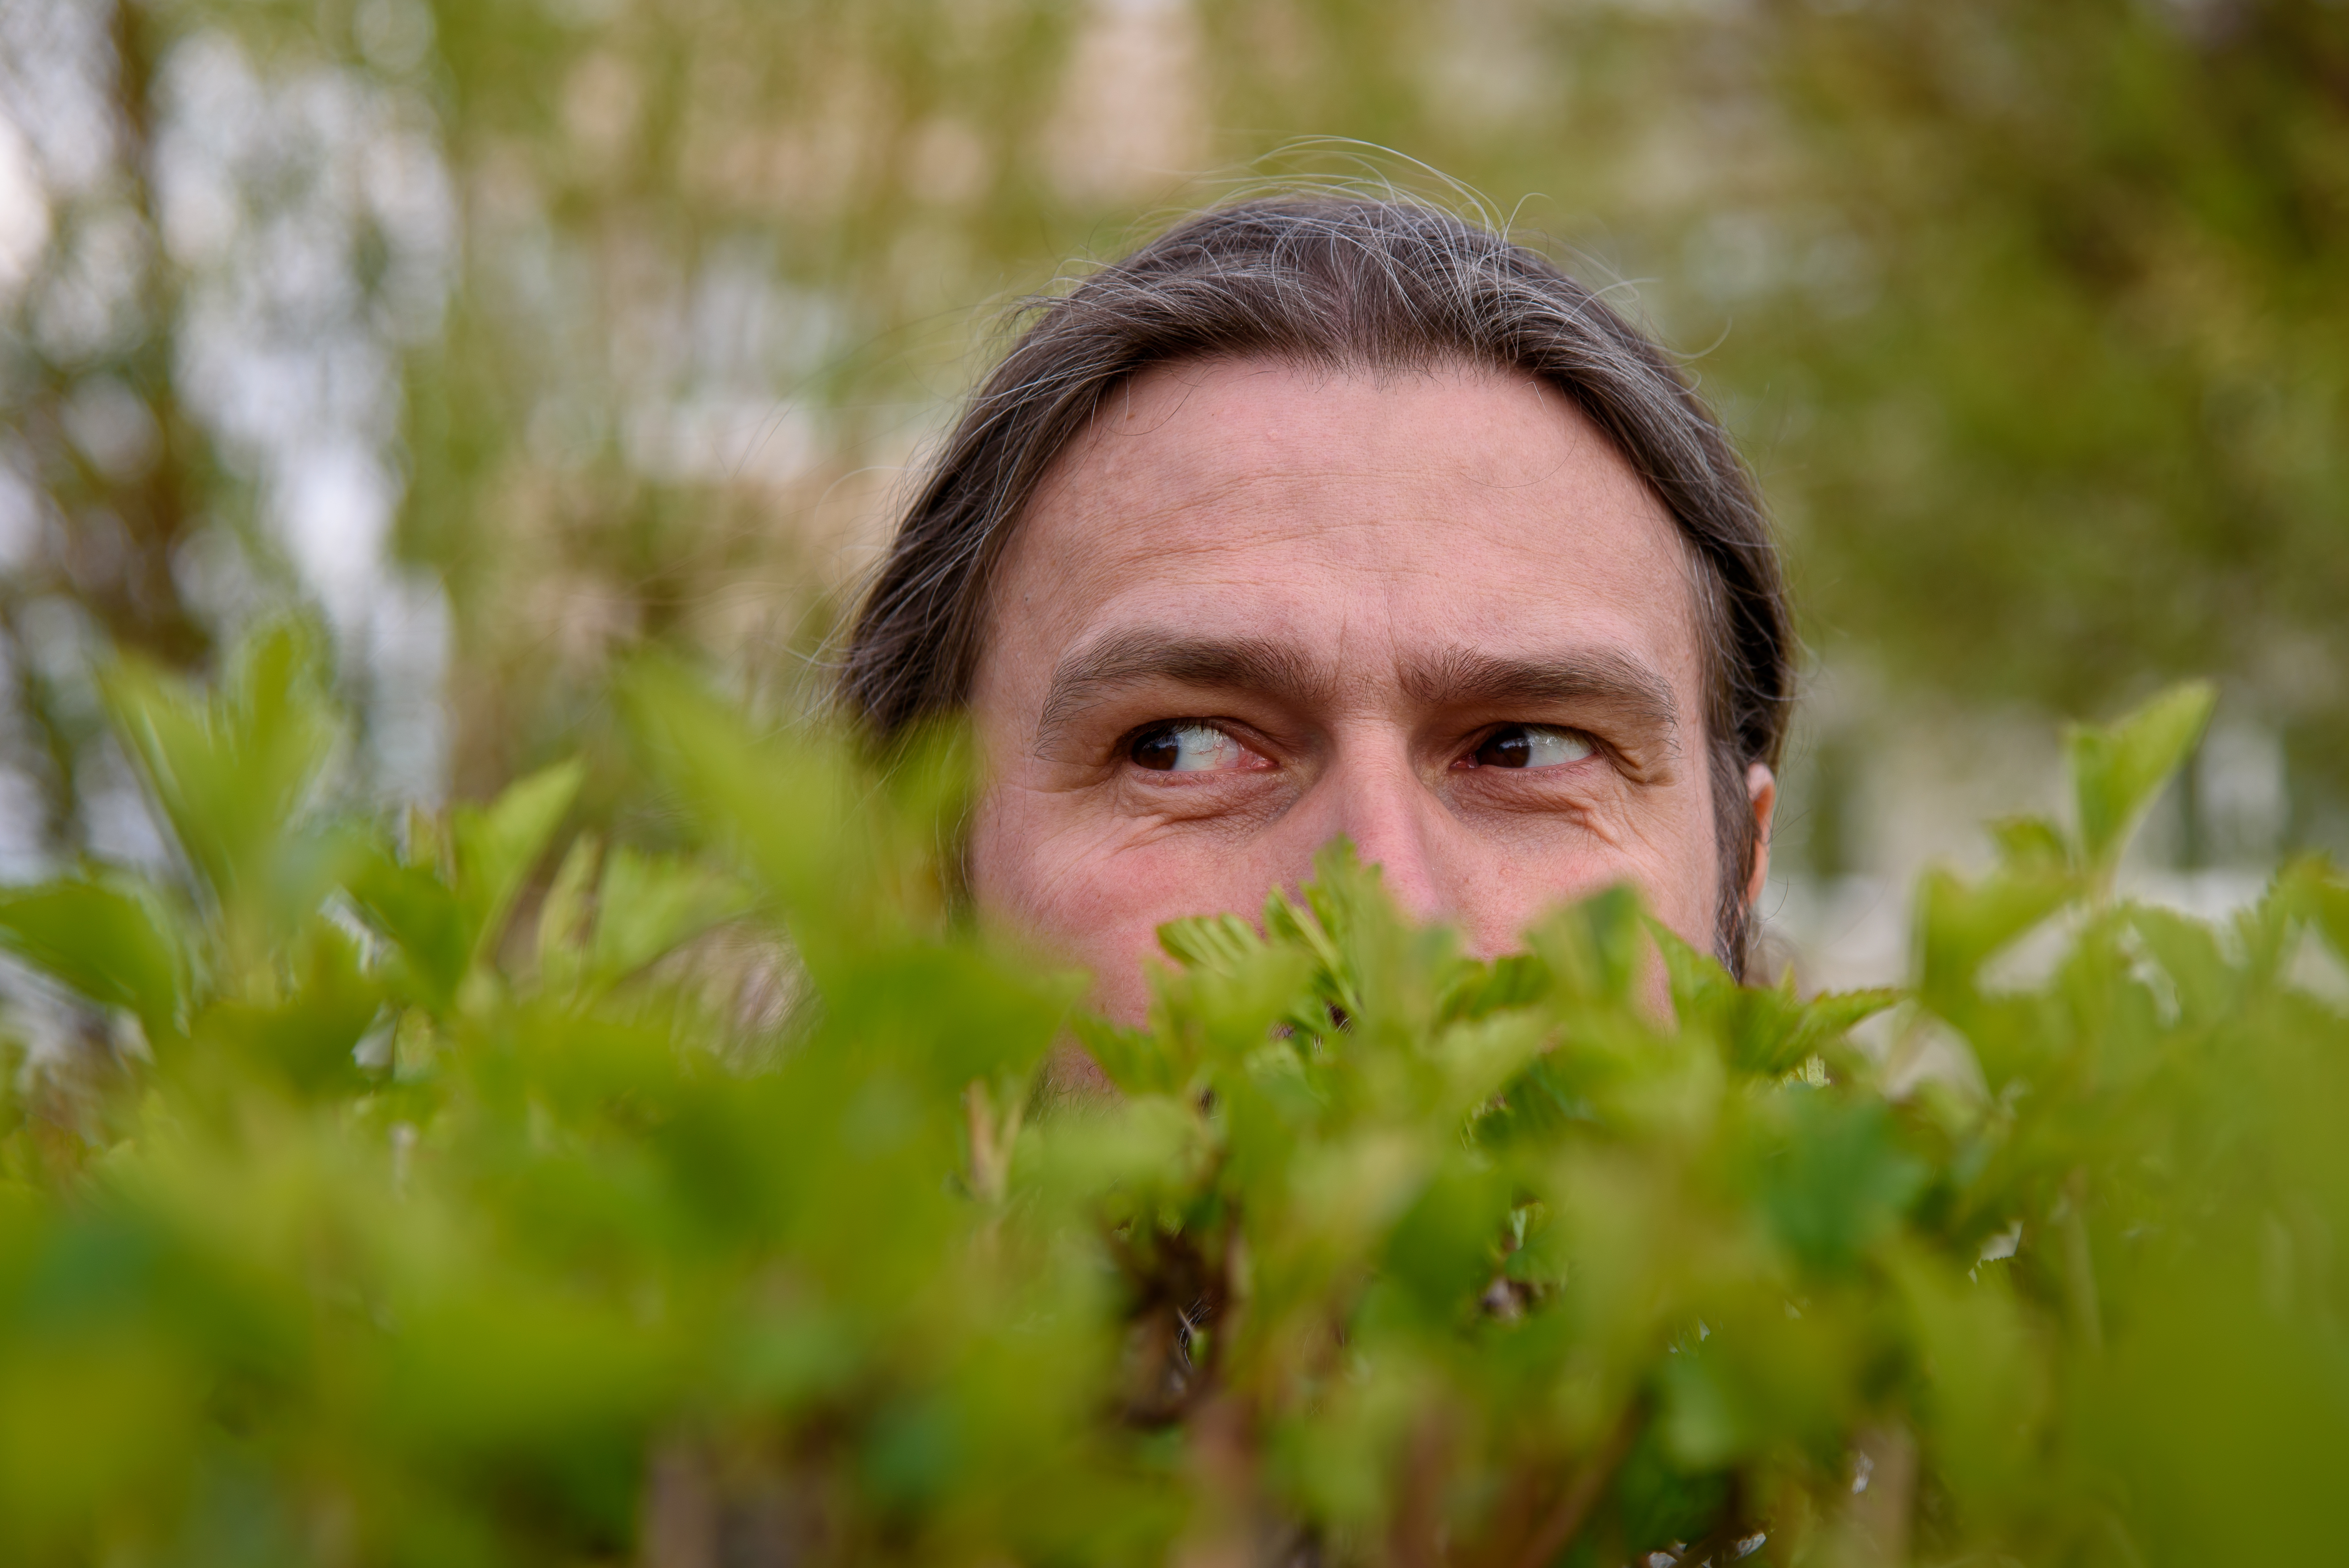 A man with a beard and a mustache is peeping in the park from behind bushes | Source: Shutterstock